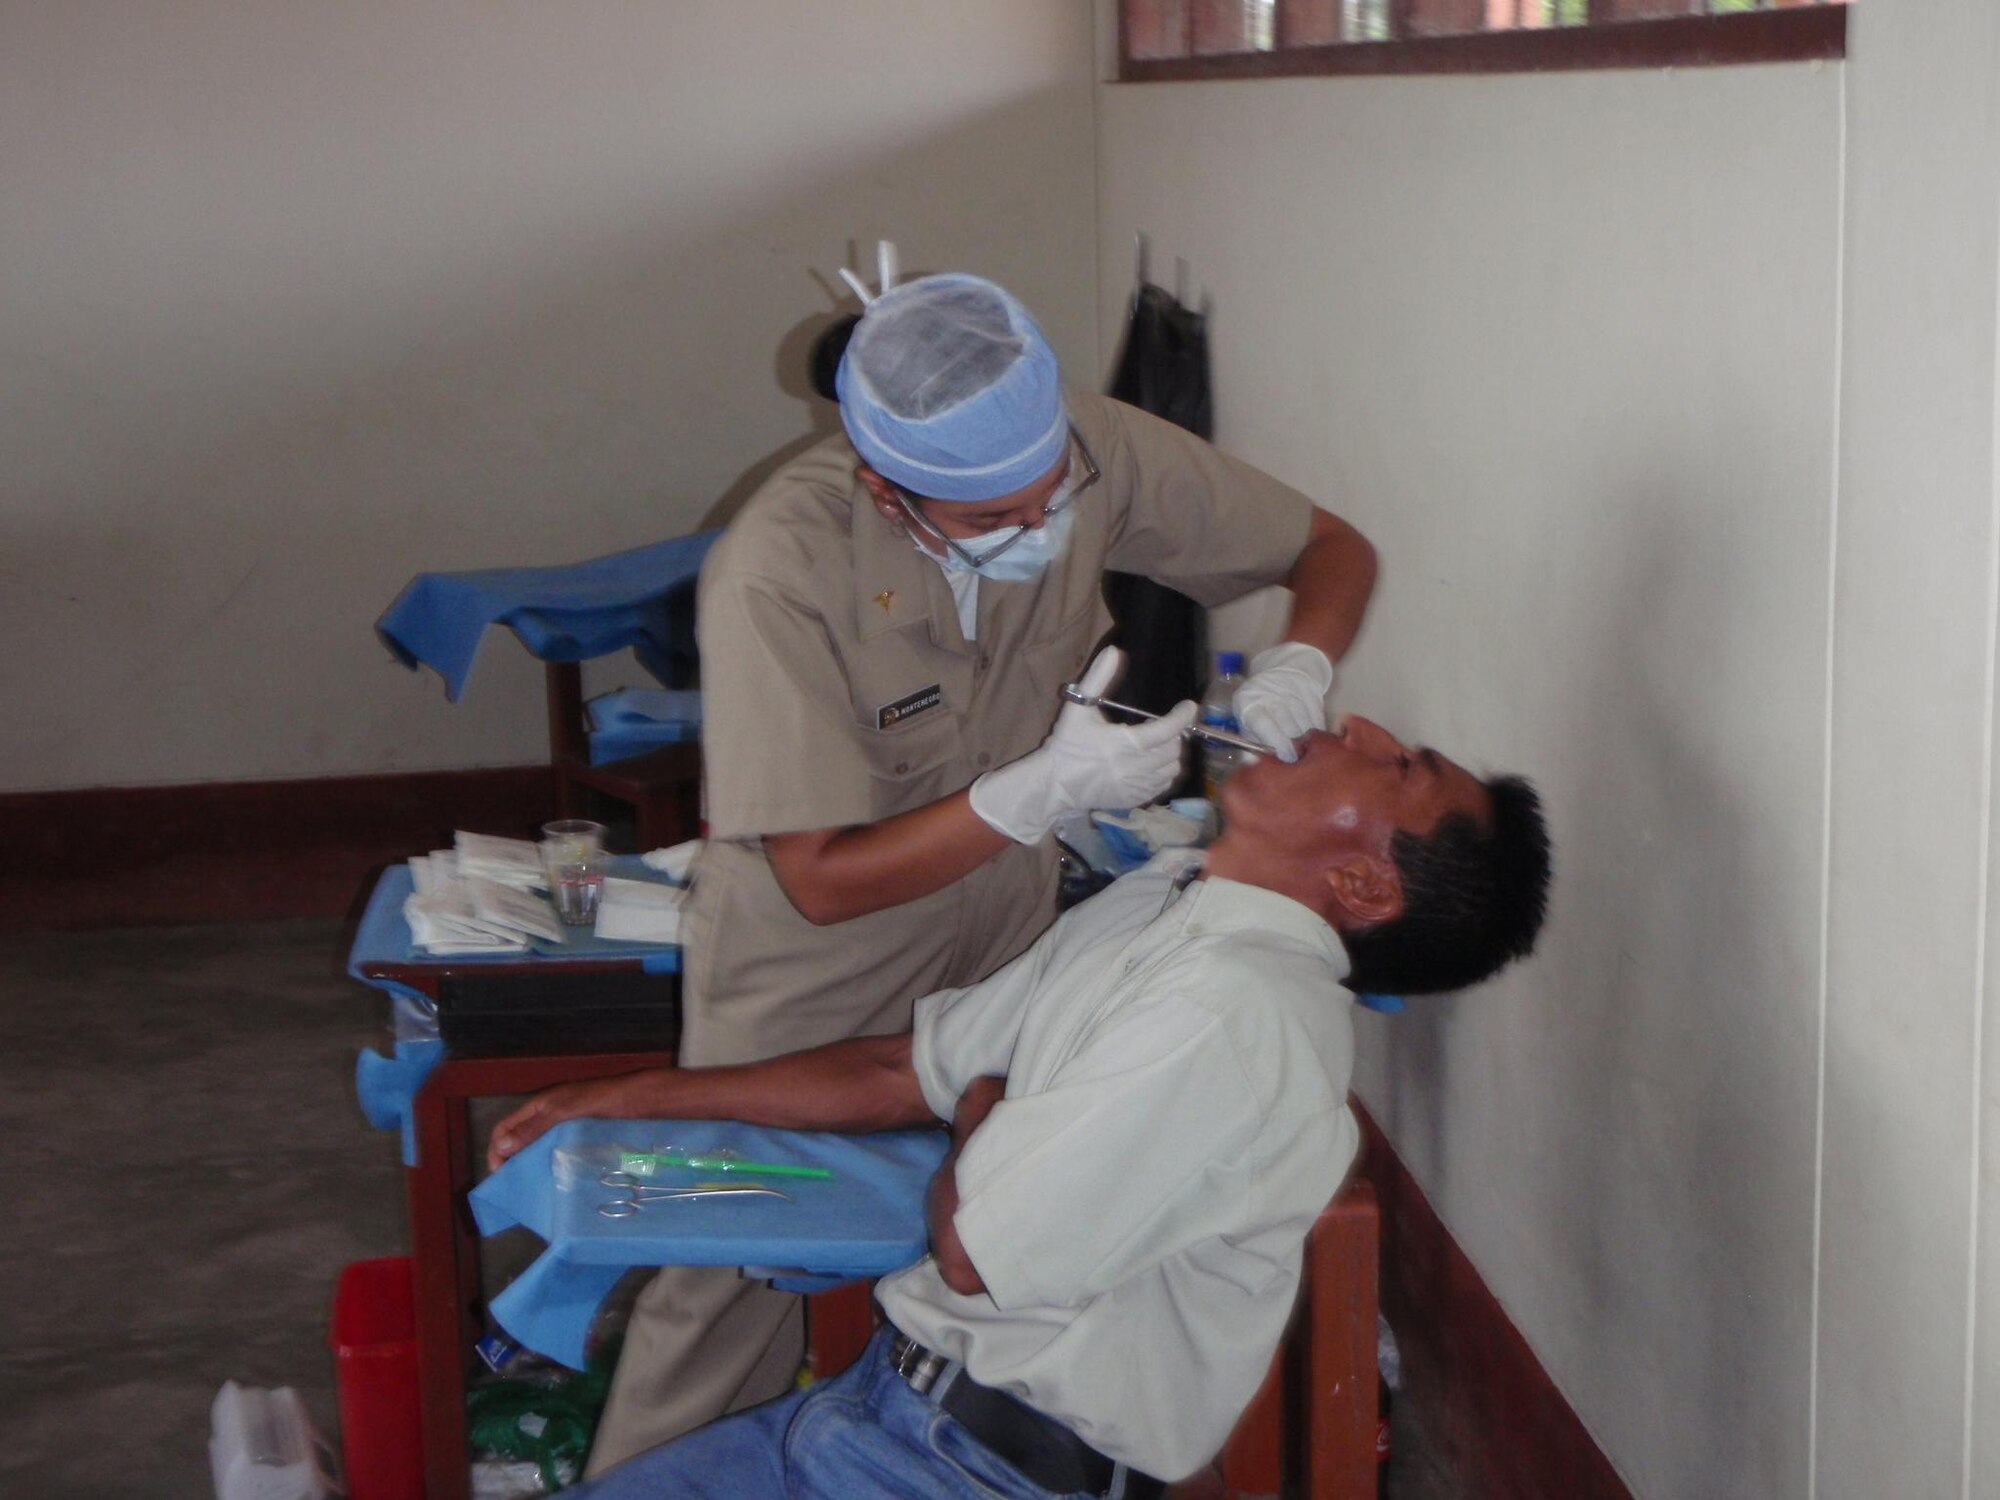 LORETO REGION, Peru -- Lt. (Dr) Blanca Montenegro, Peruvian Navy, injects a dental patient with anesthetic.  A team of 15 Air Force doctors and technicians, along with more than 50 Peruvian Navy, Ministry of Health, and civilian practitioners, treated patients in the remote region for two weeks as part of the ongoing Riverine Project, a three year humanitarian medical project sponsored by Twelfth Air Force (Air Forces Southern).  (U.S. Air Force photo by Master Sgt. Jesse Moreno)